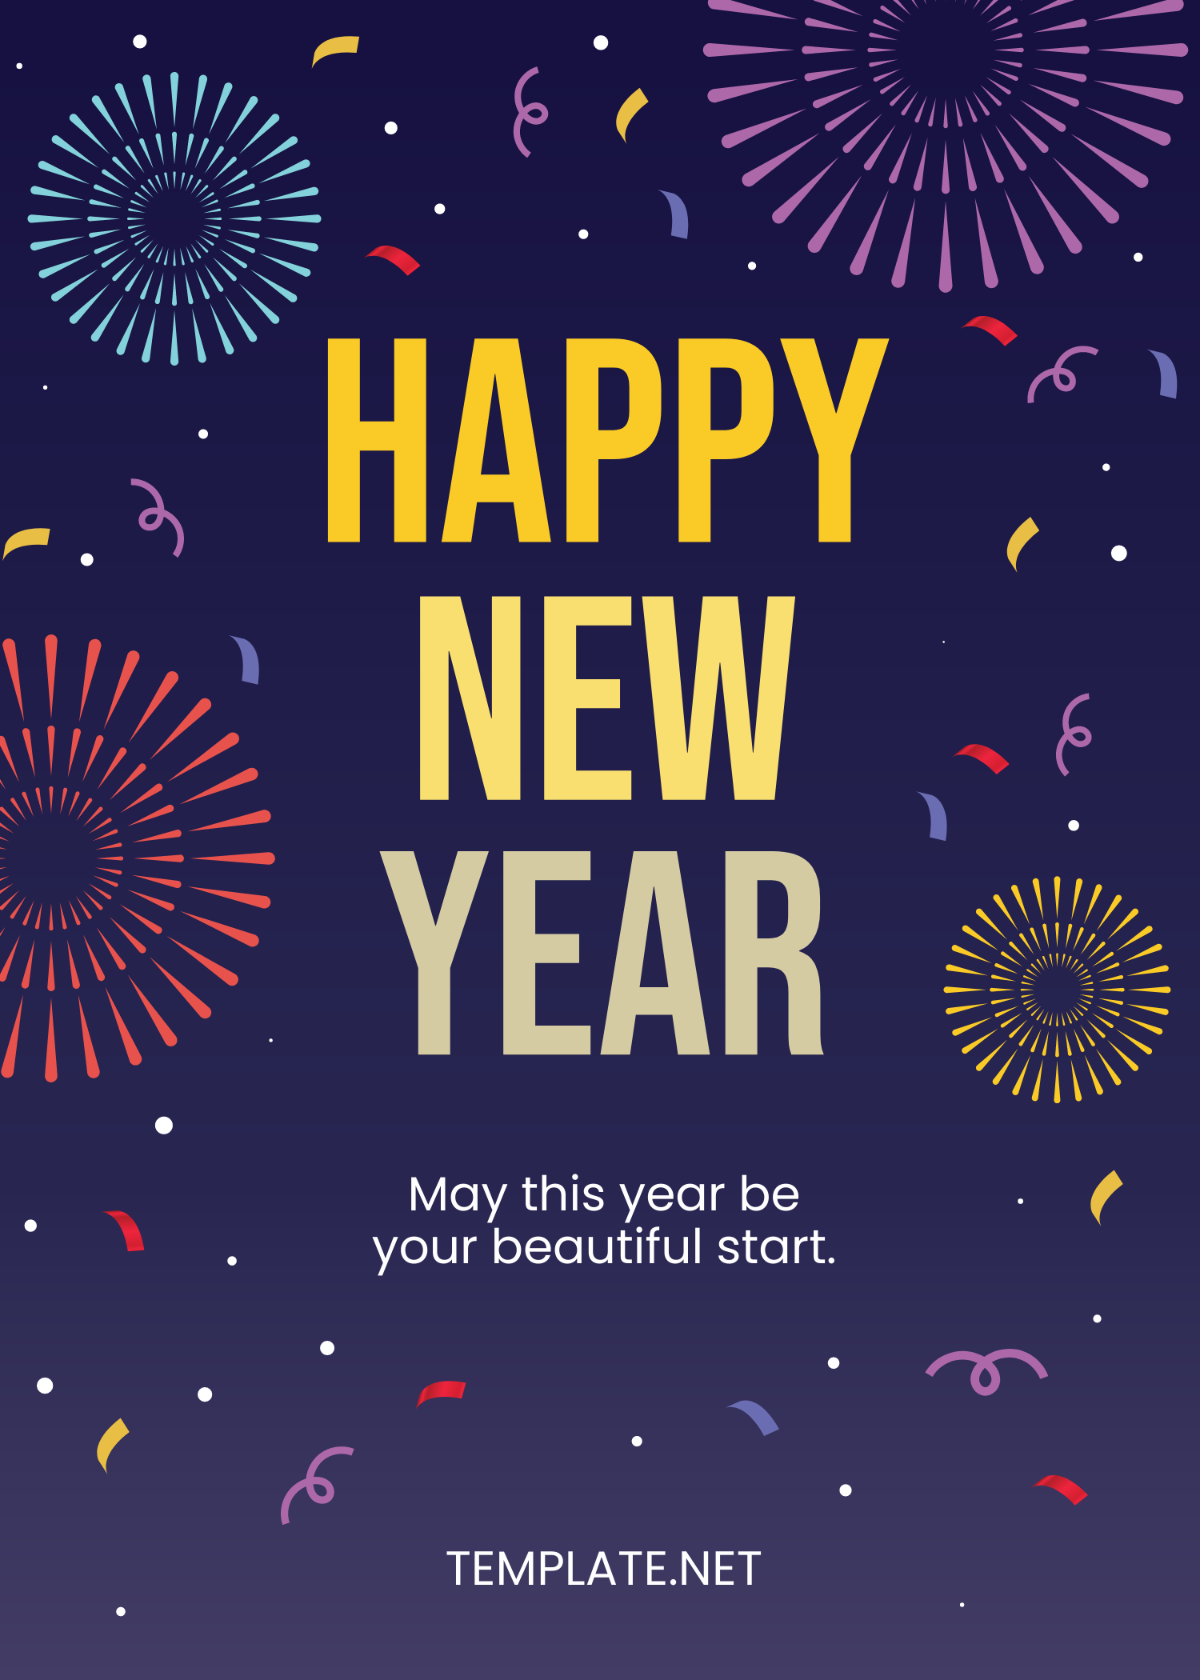 Unique New Year Wishes Template